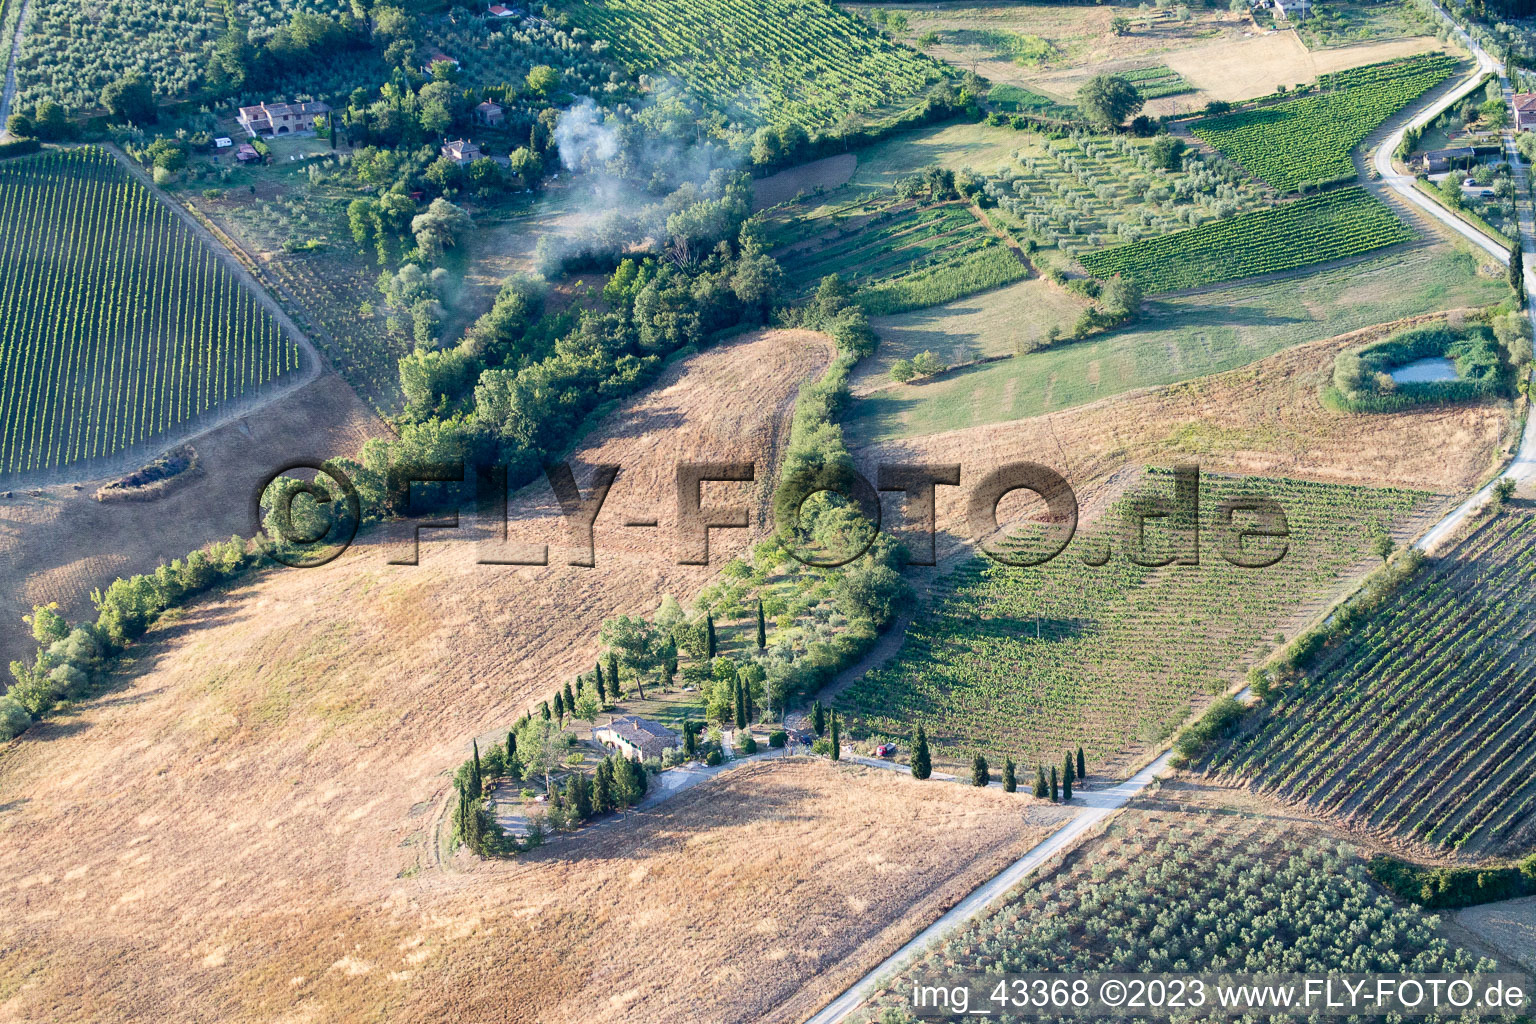 Aerial view of Montepulciano in the state Tuscany, Italy